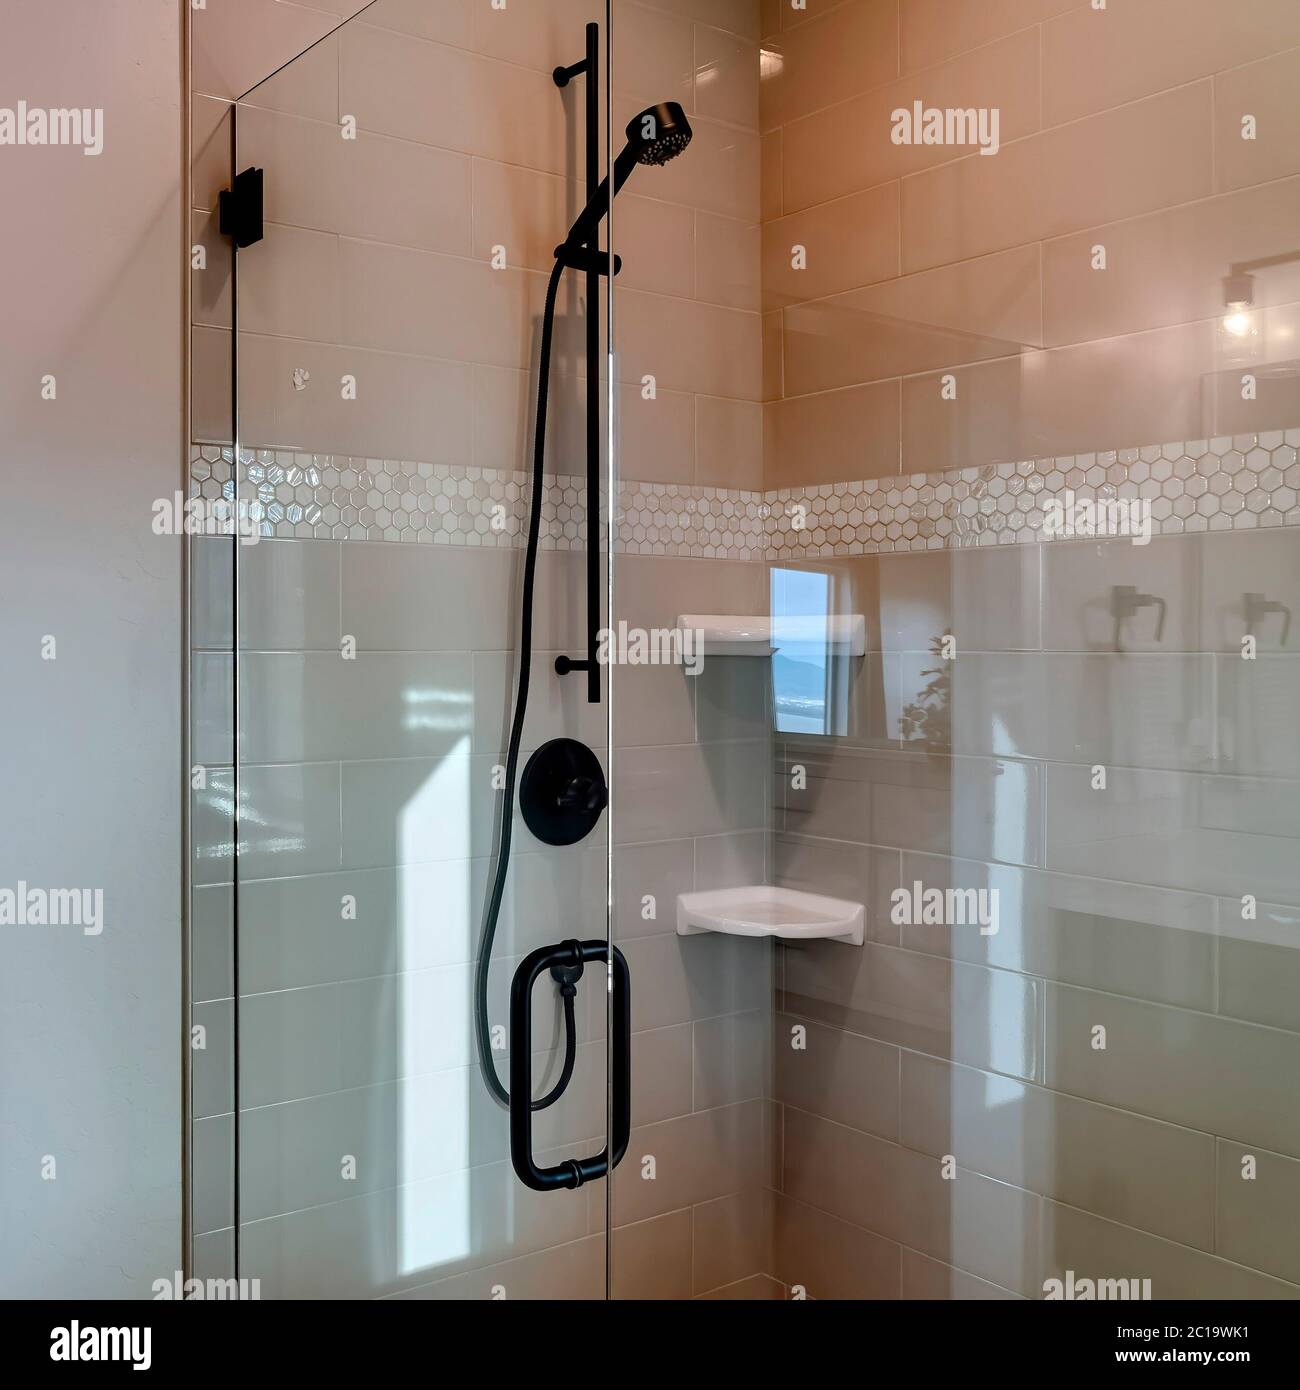 Square Frame Shower Stall With Frameless Glass Enclosure And Hinged Door Inside Bathroom Stock Photo Alamy,Interior Chip And Joanna Gaines Homes